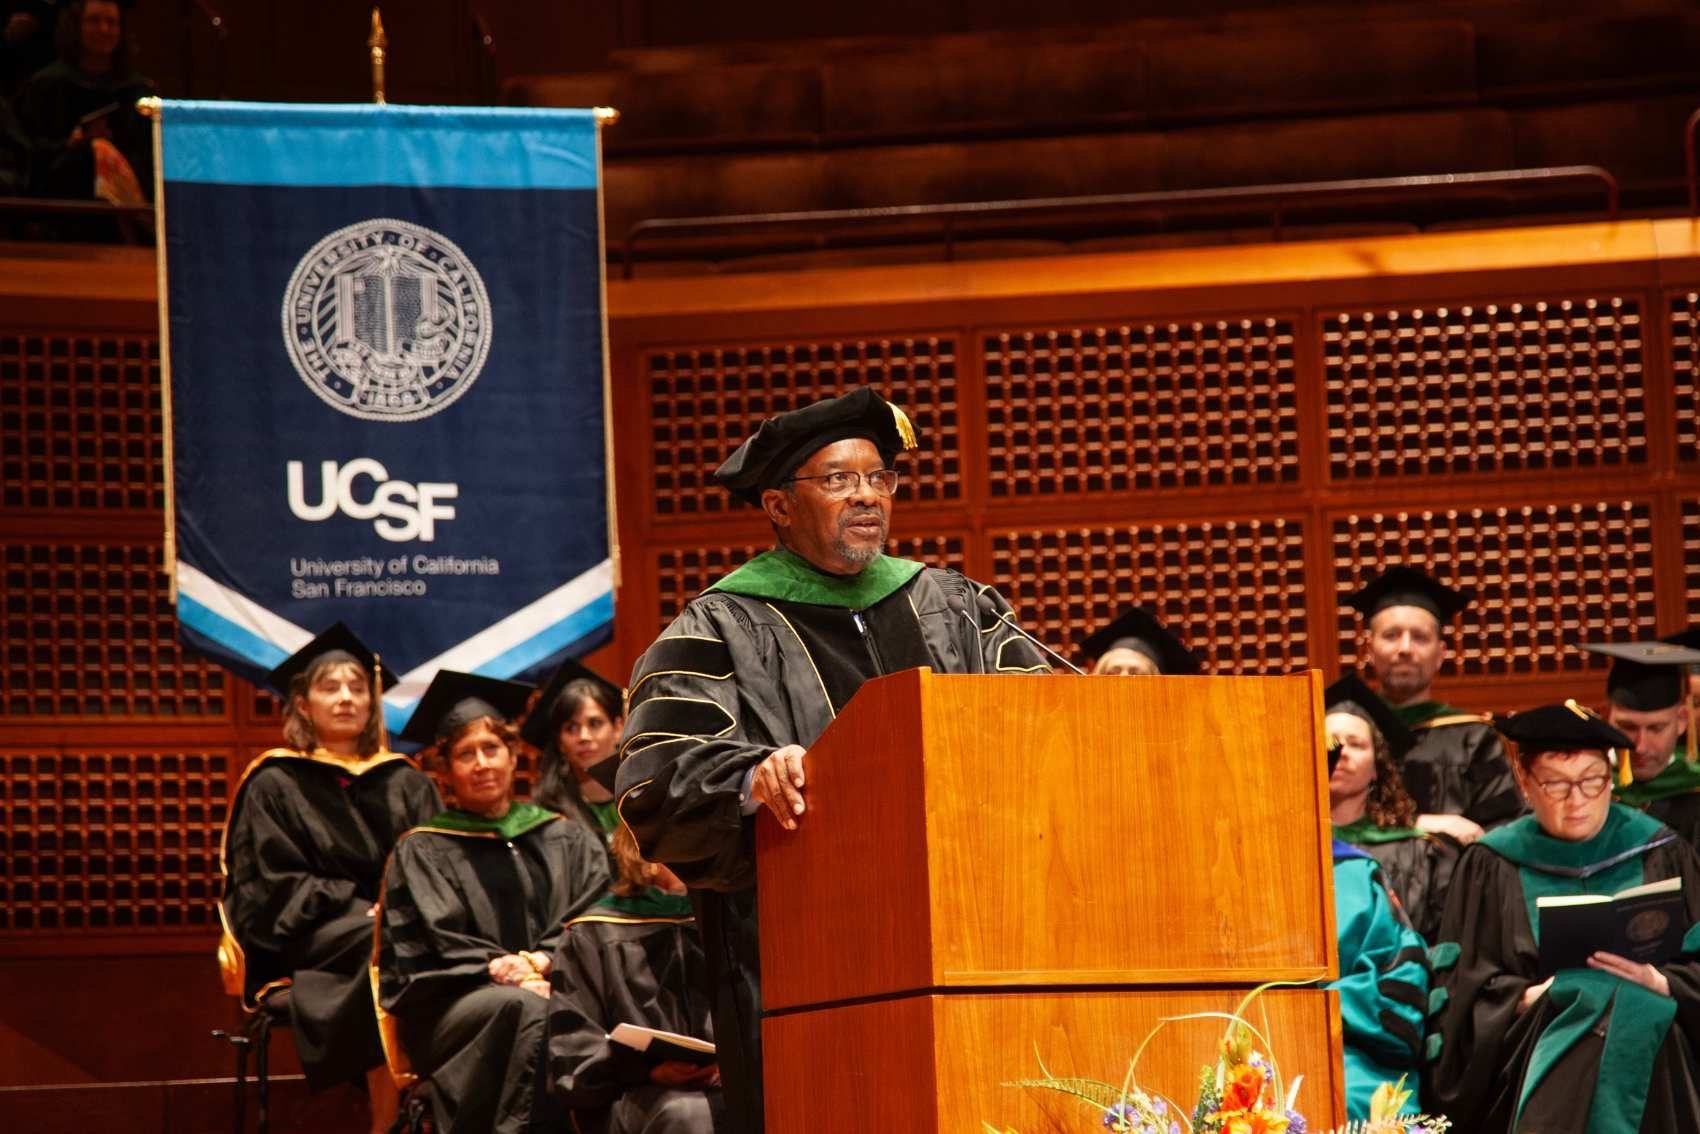 Dean Talmadge E. King, Jr speaks at podium in front of large audience